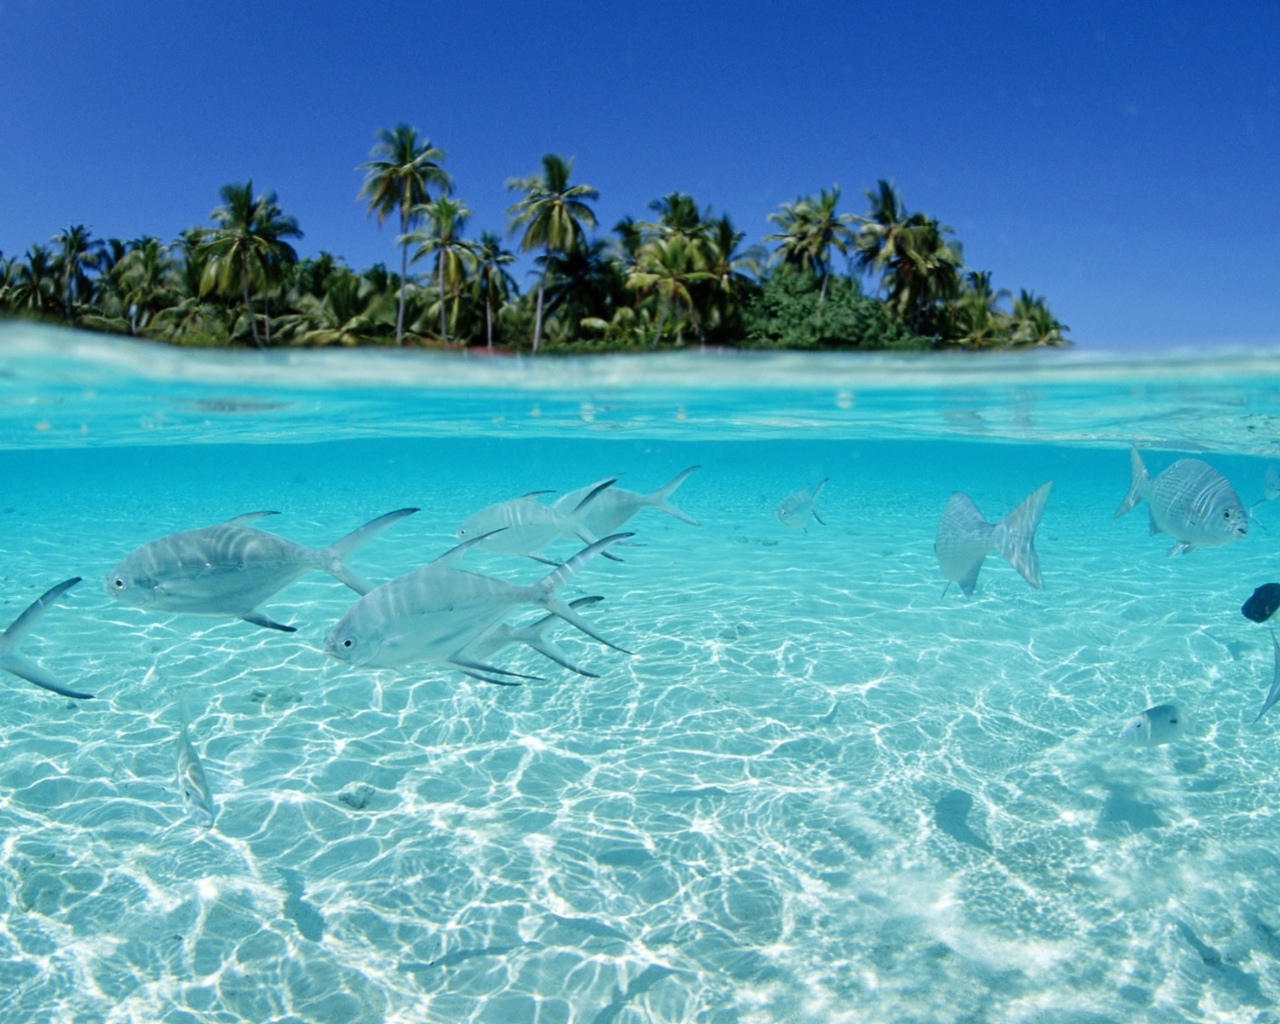 Tropical Island And Fish In Blue Sea wallpaper 1280x1024